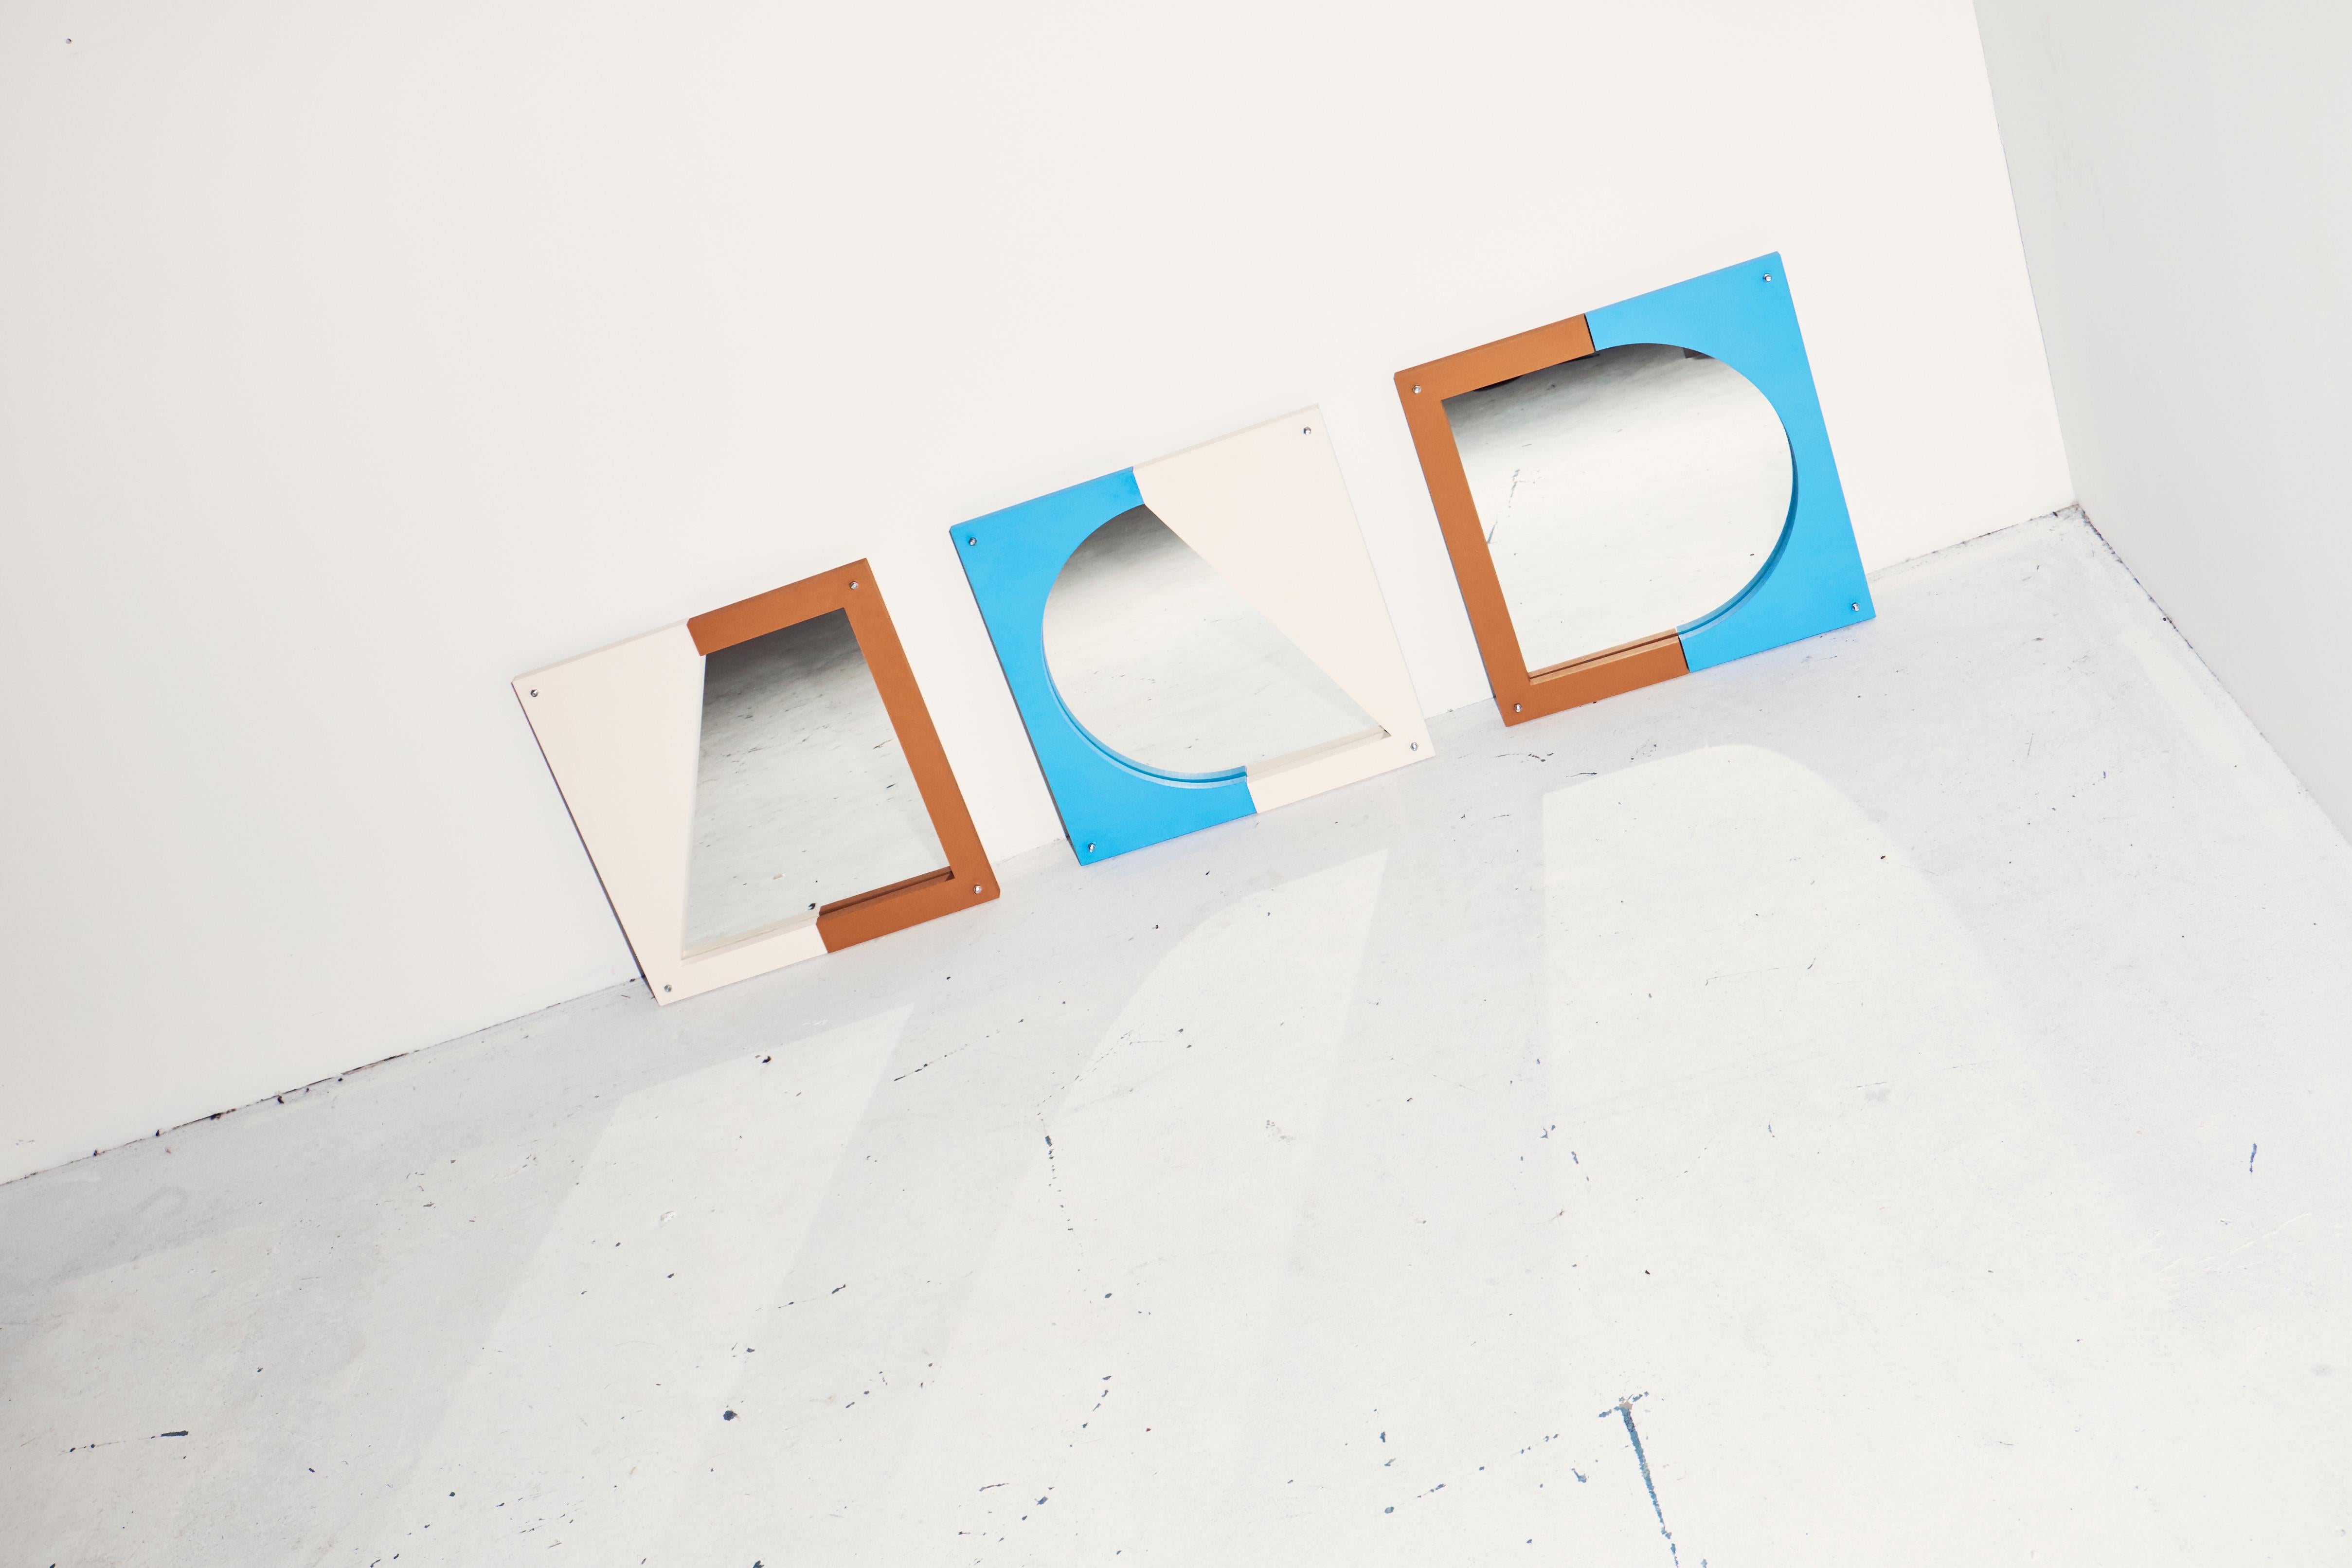 Set of 3 mould mirrors by Theodora Alfredsdottir
Unique set
Materials: MDF
Dimensions: 40 x 40 x 3 cm 

Theodora Alfredsdottir is a product design studio based in London. 
Theodora is an Icelandic product designer. She holds a bachelor’s